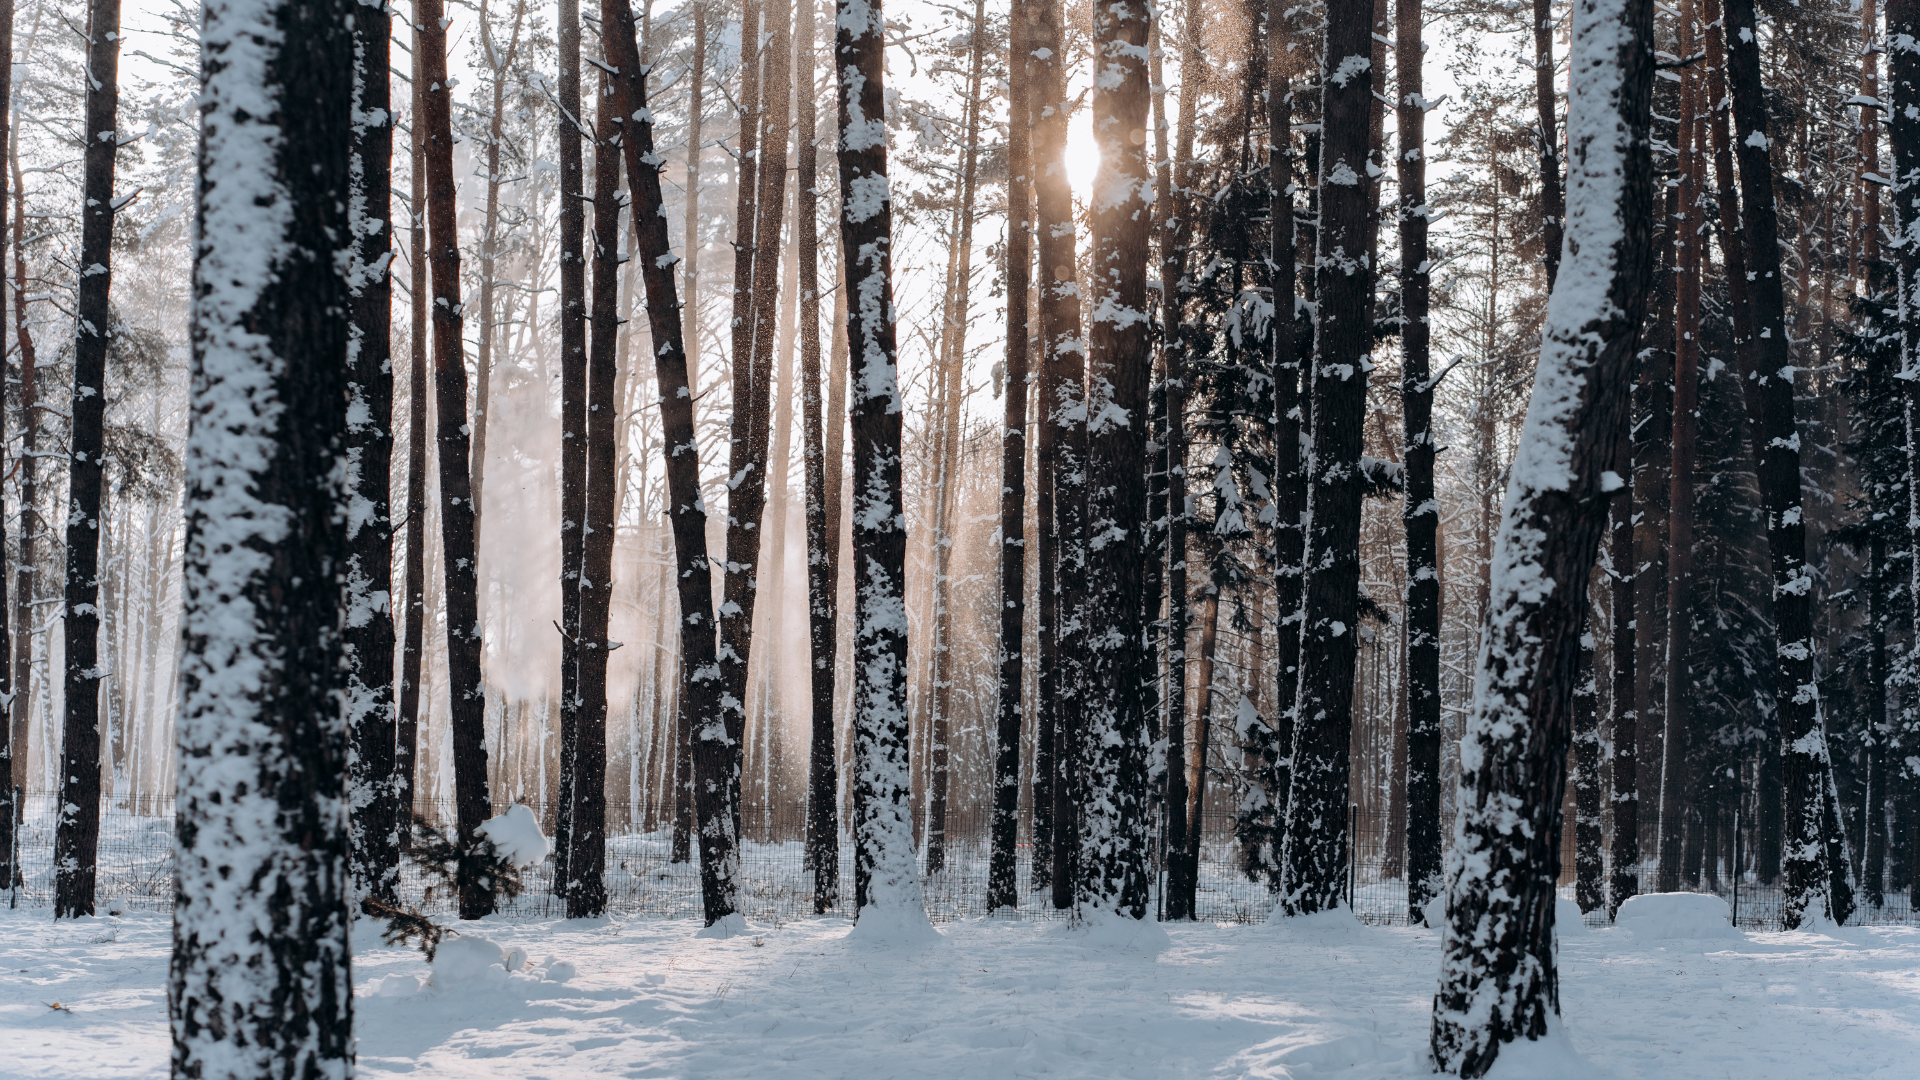 Wooded forest with snow on trees and ground.